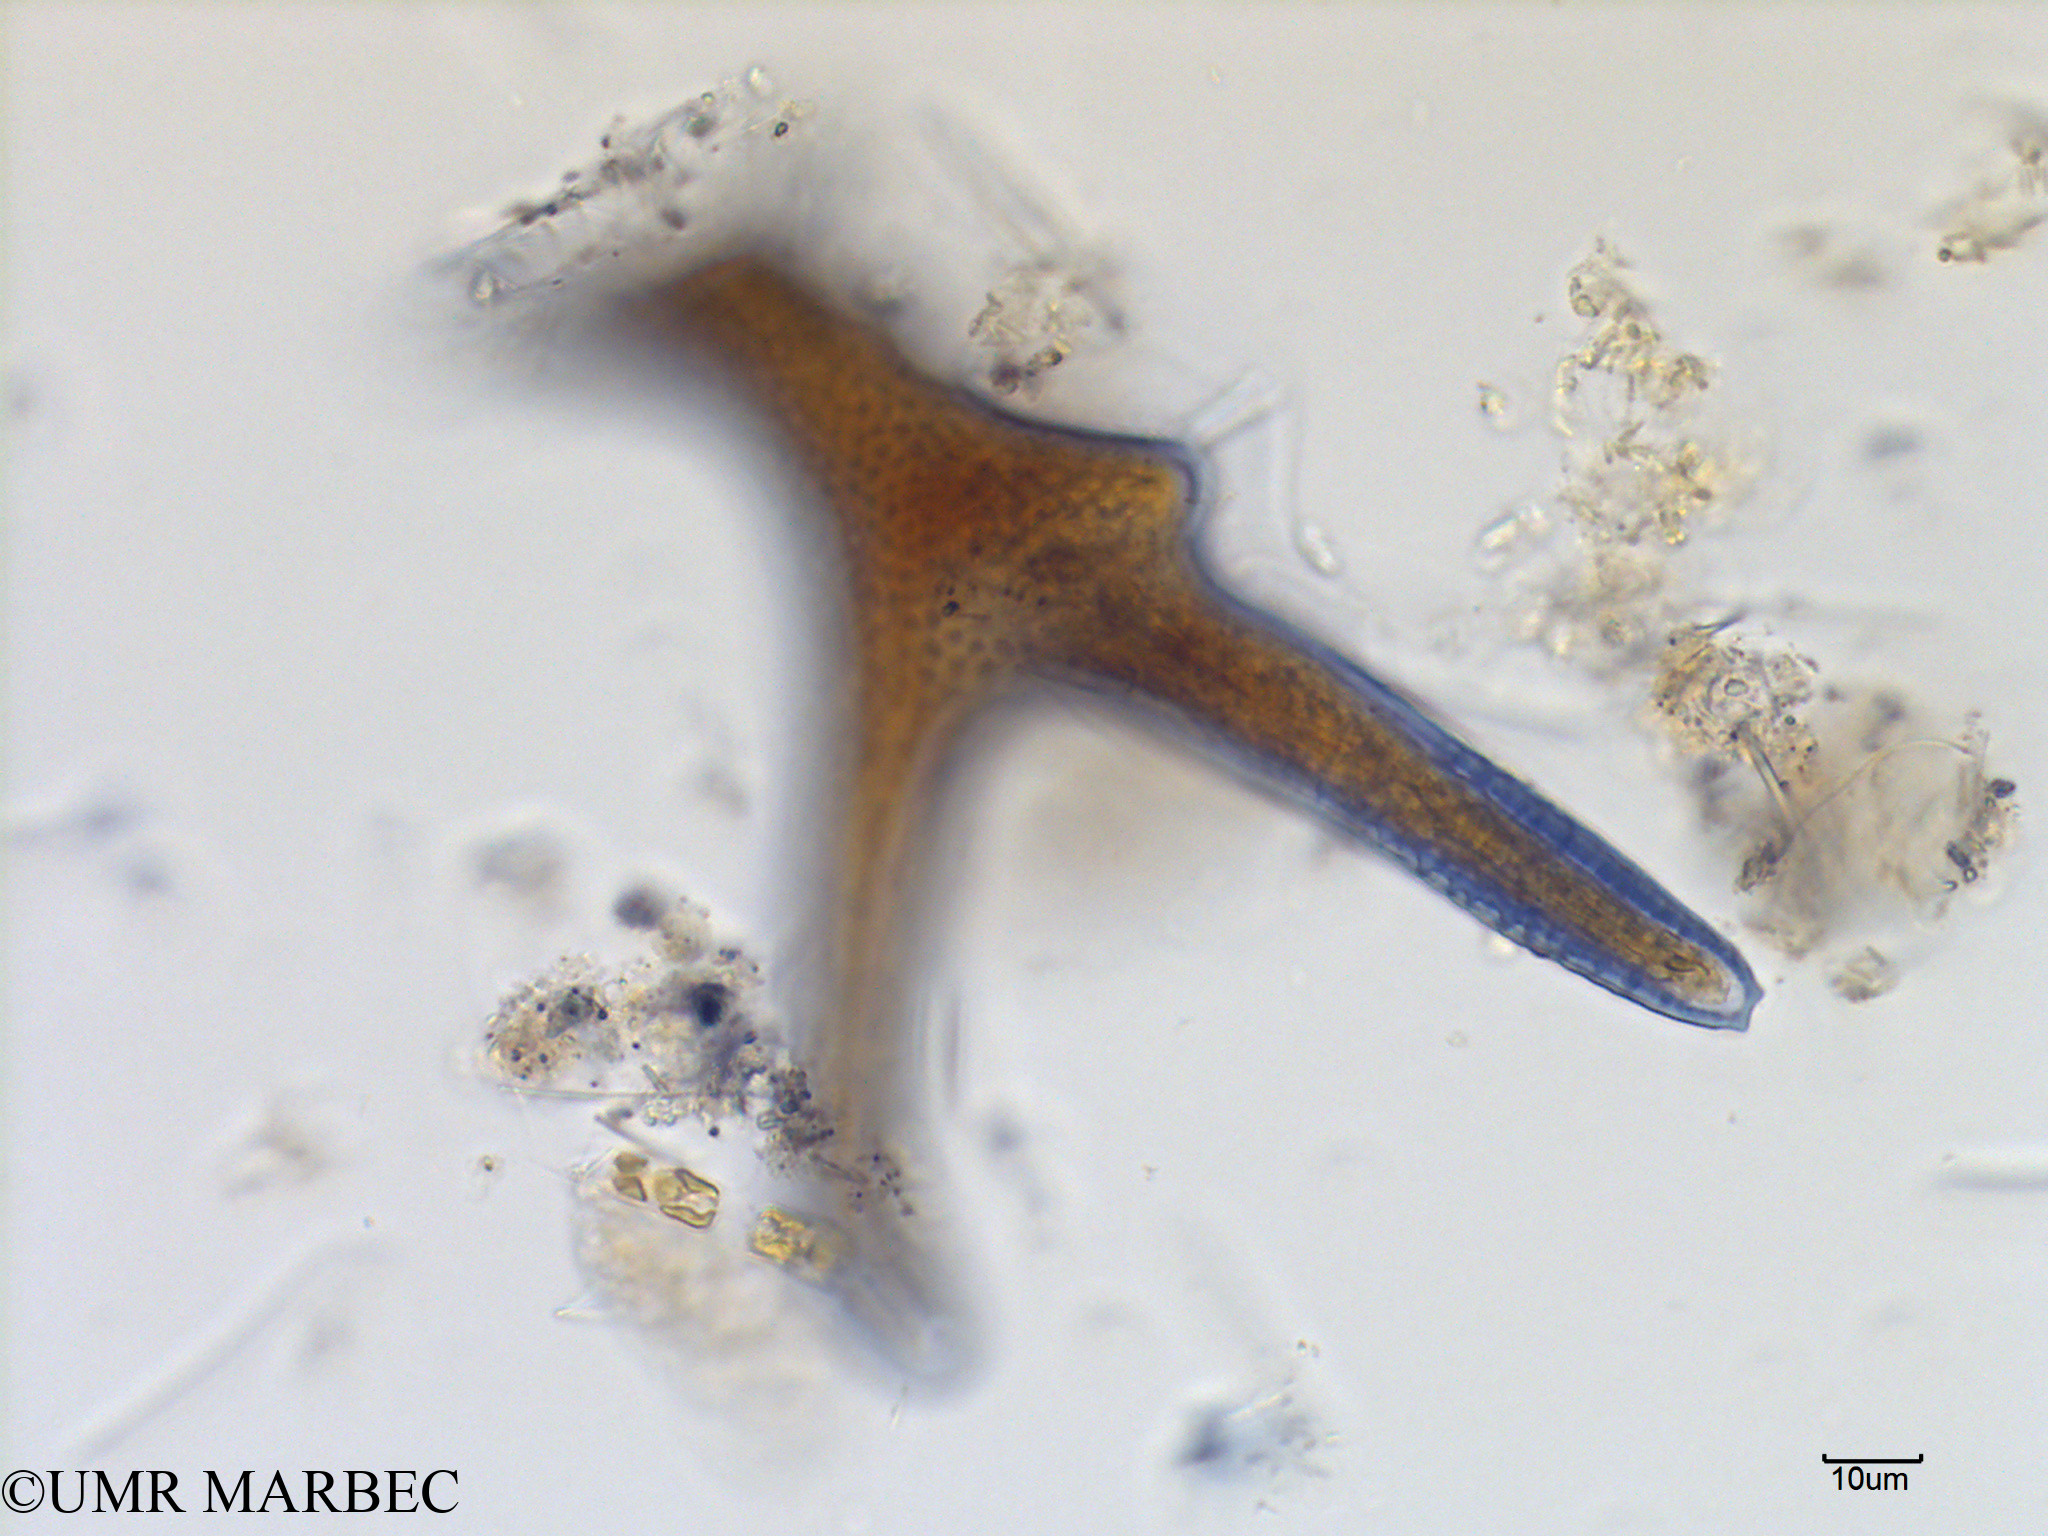 phyto/Scattered_Islands/mayotte_lagoon/SIREME May 2016/Dinophysis miles (MAY8_dino a identifier-9).tif(copy).jpg